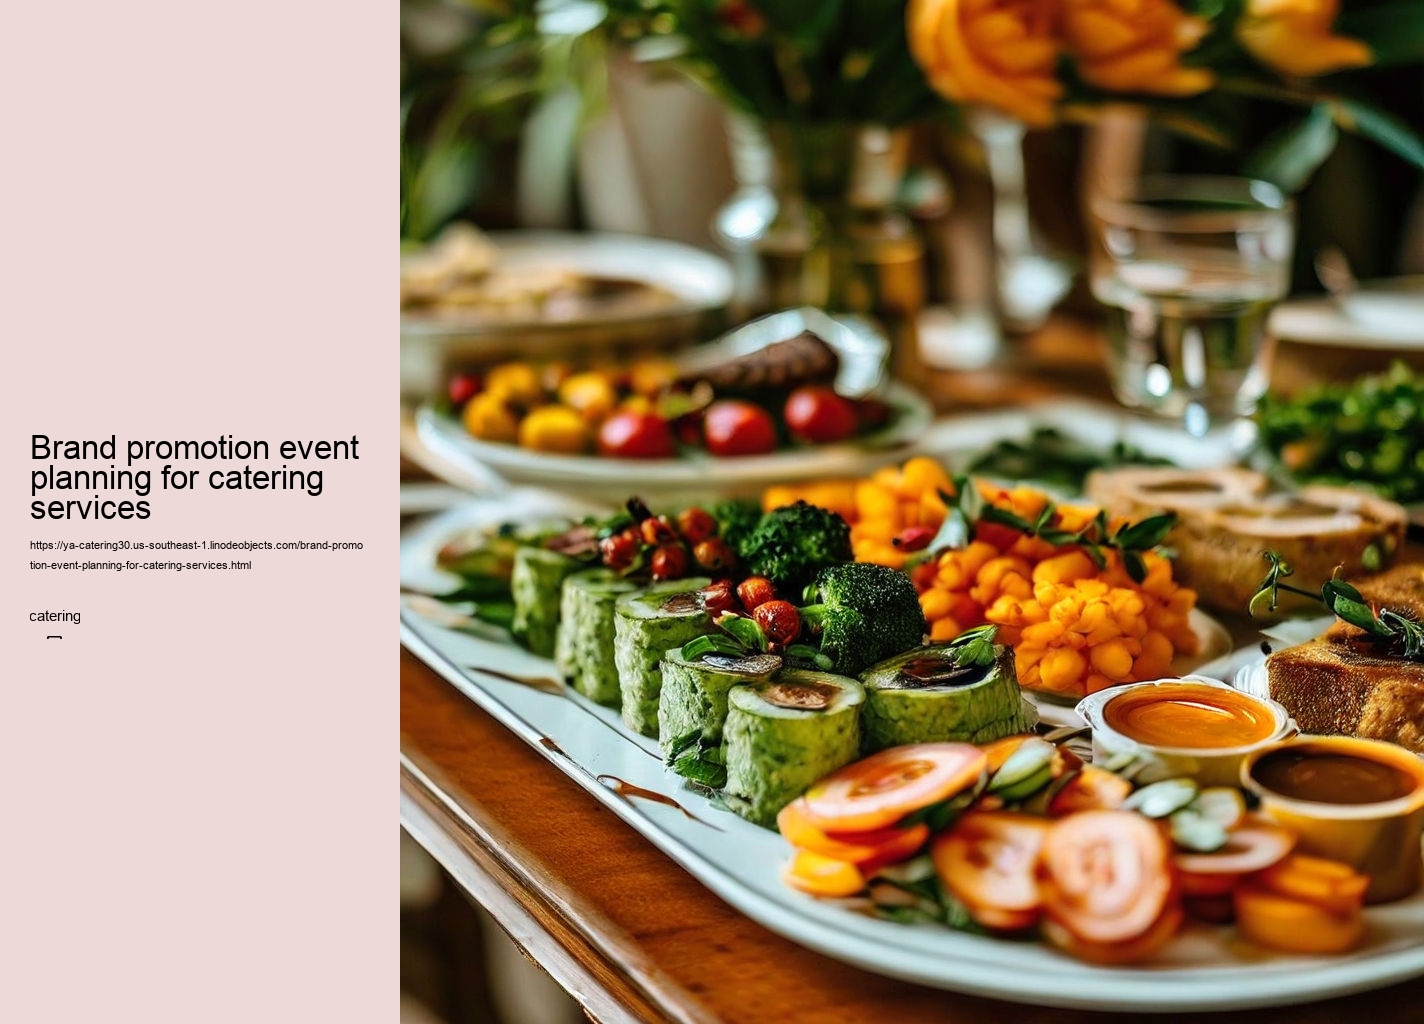 Brand promotion event planning for catering services